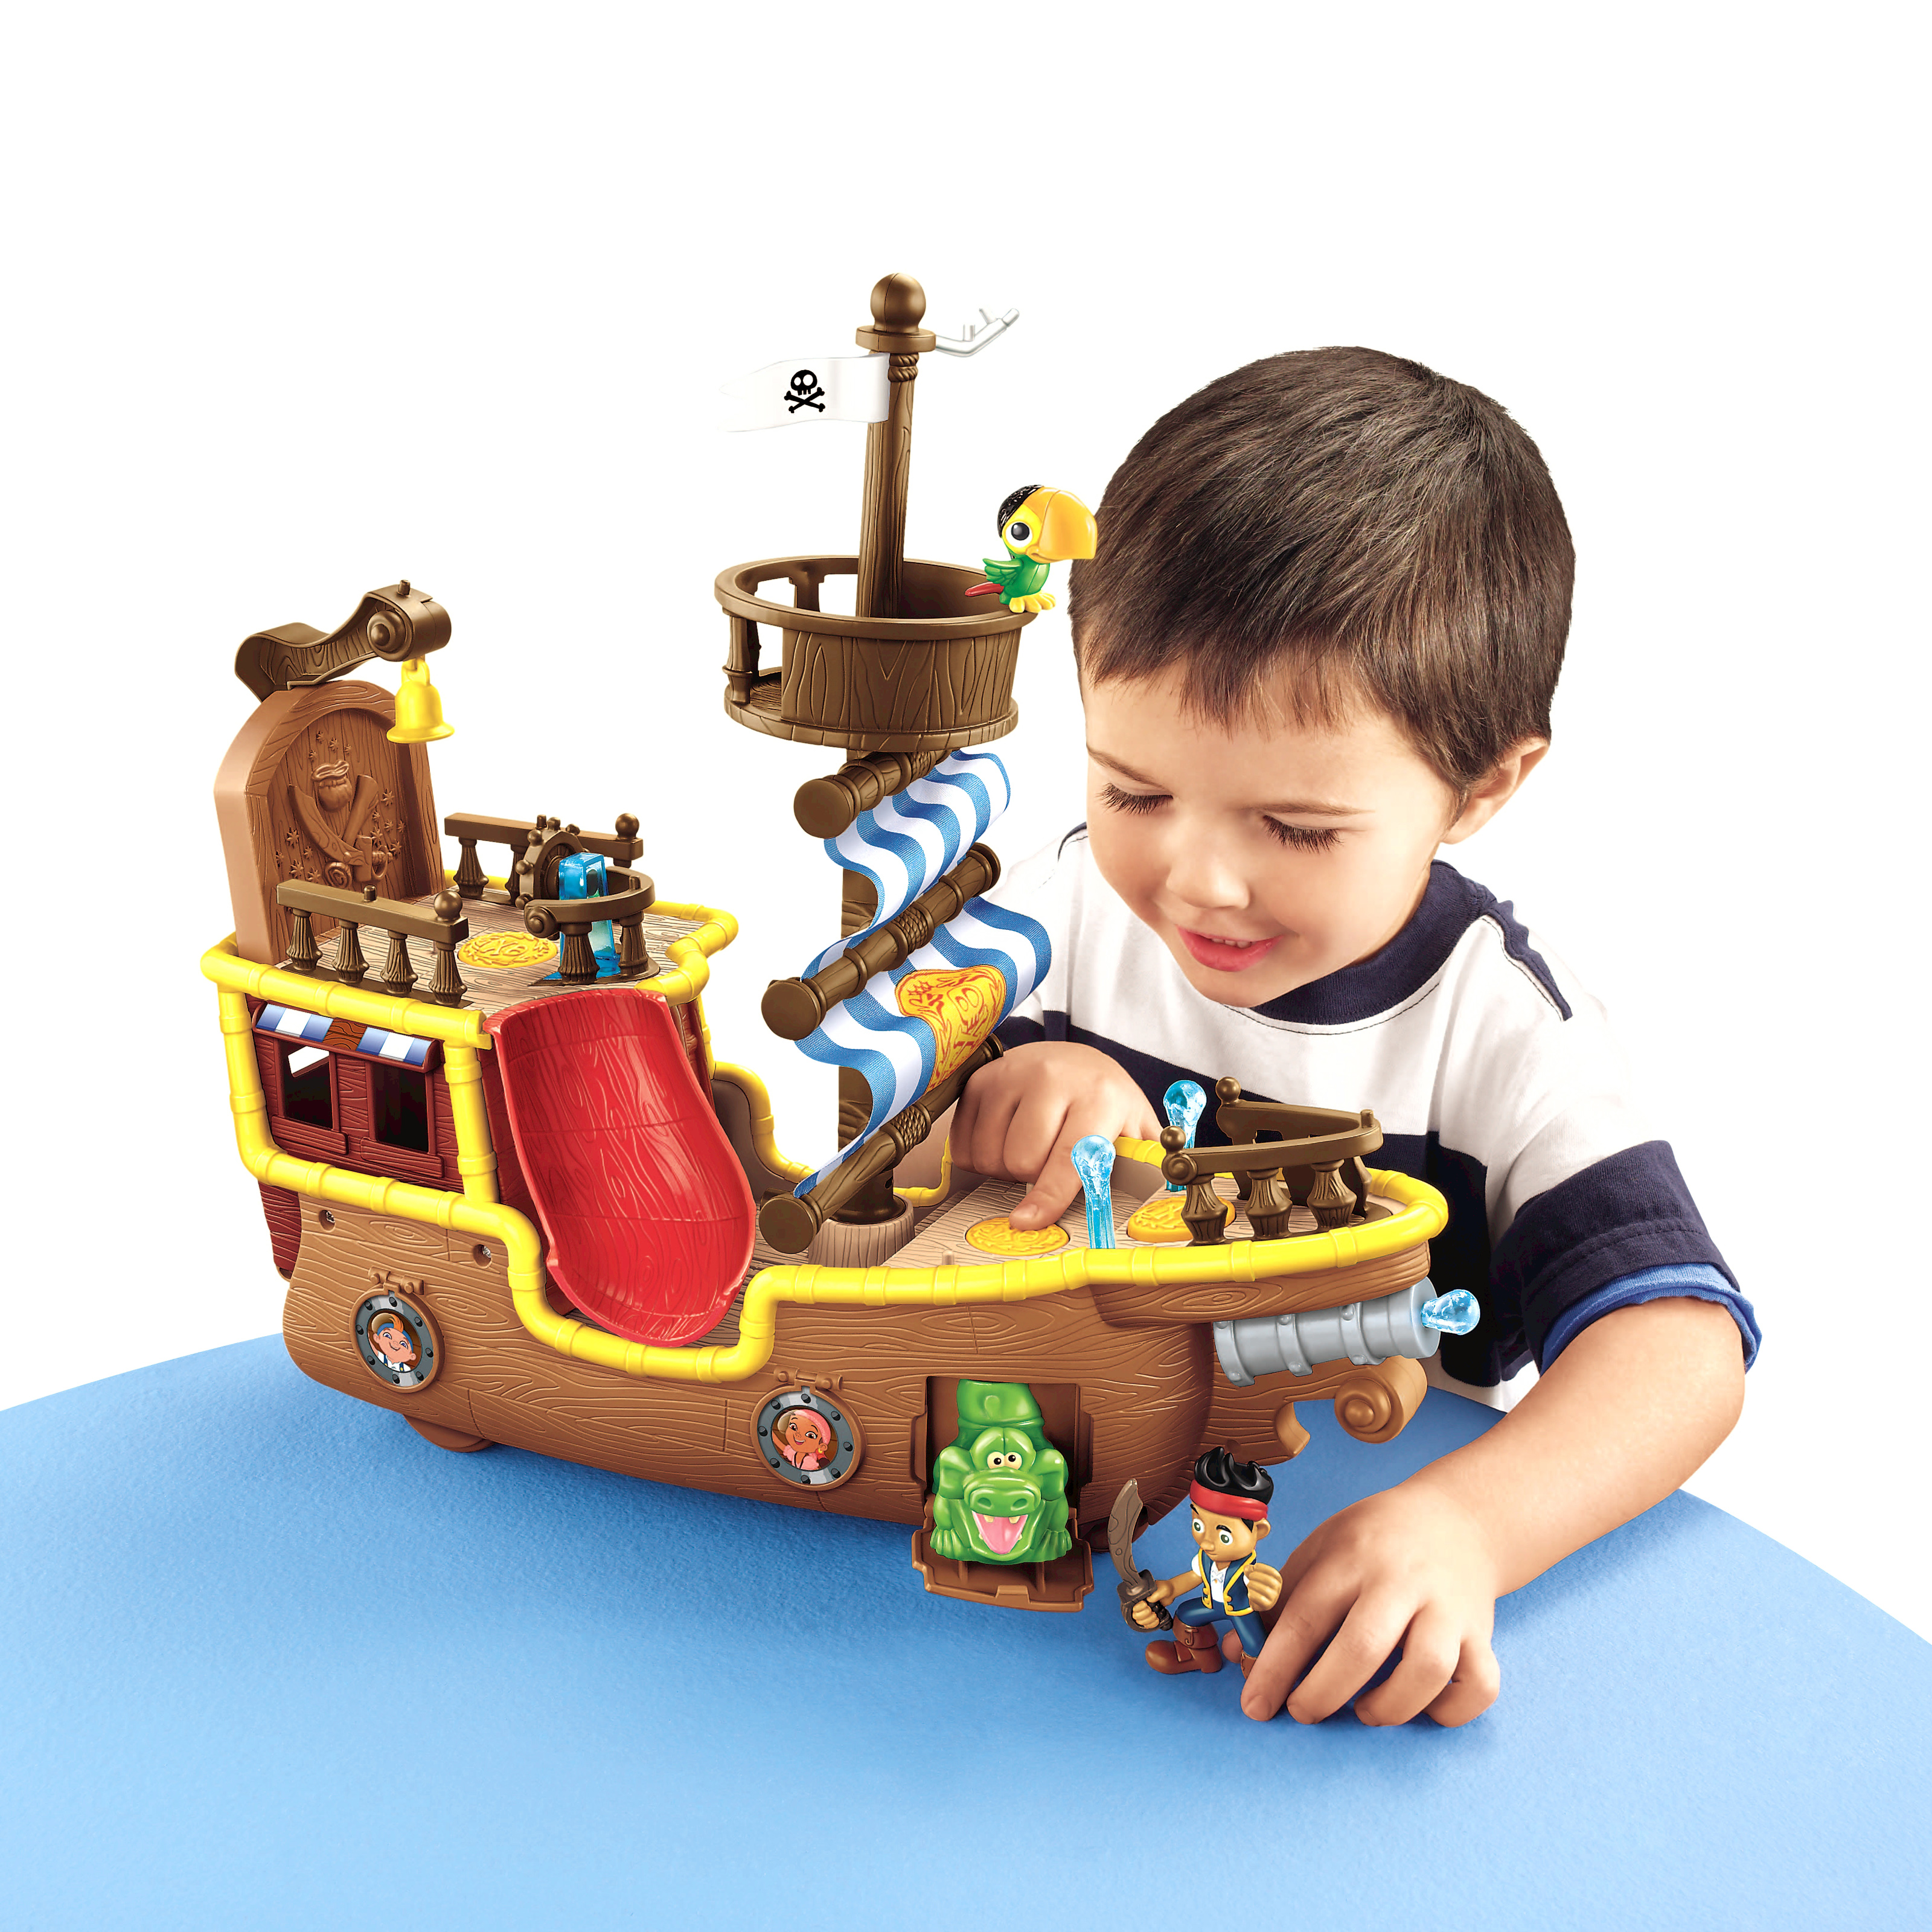 Fisher-Price Jakes Musical Pirate Ship Bucky - image 1 of 7